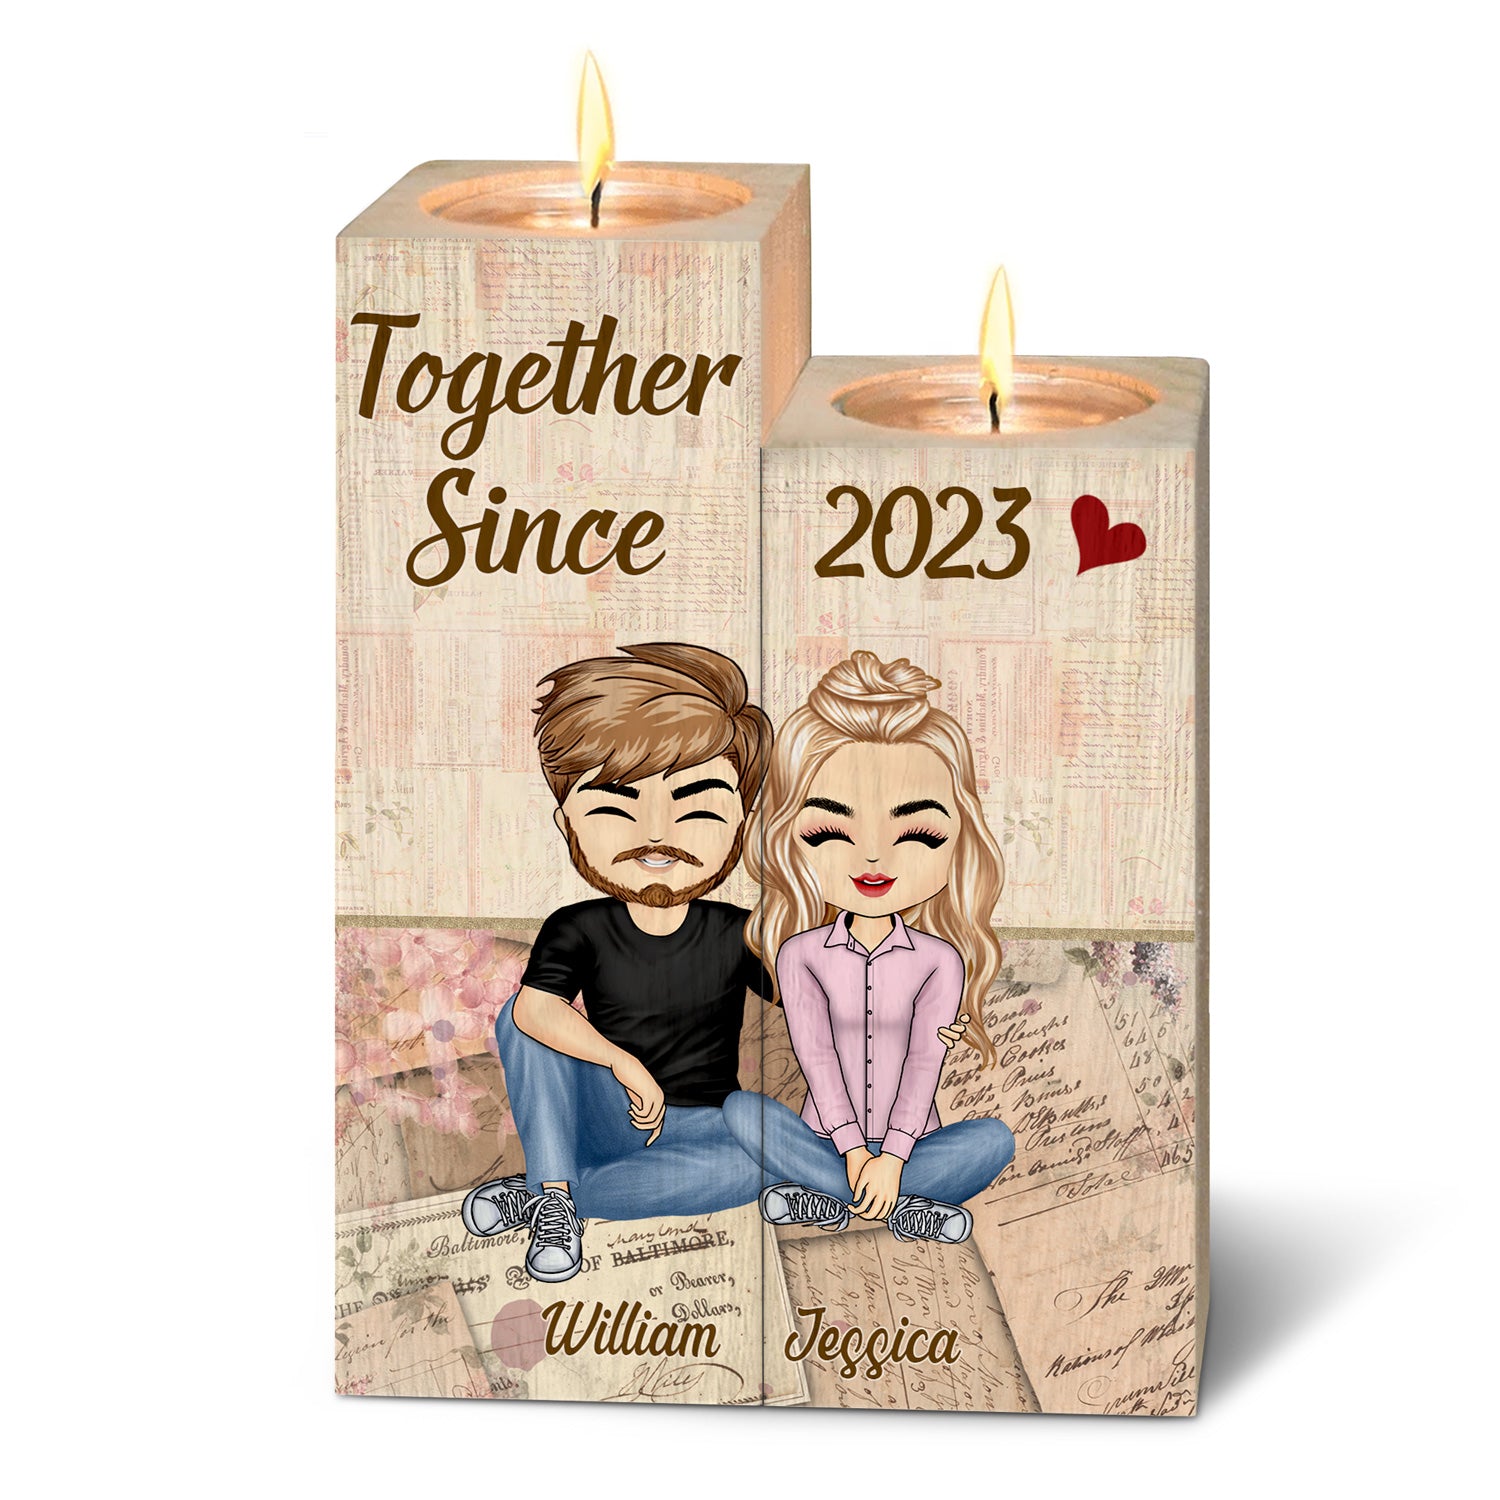 Together Since Couple - Anniversary, Birthday Gift For Spouse, Husband, Wife, Boyfriend, Girlfriend - Personalized Custom Candle Holder